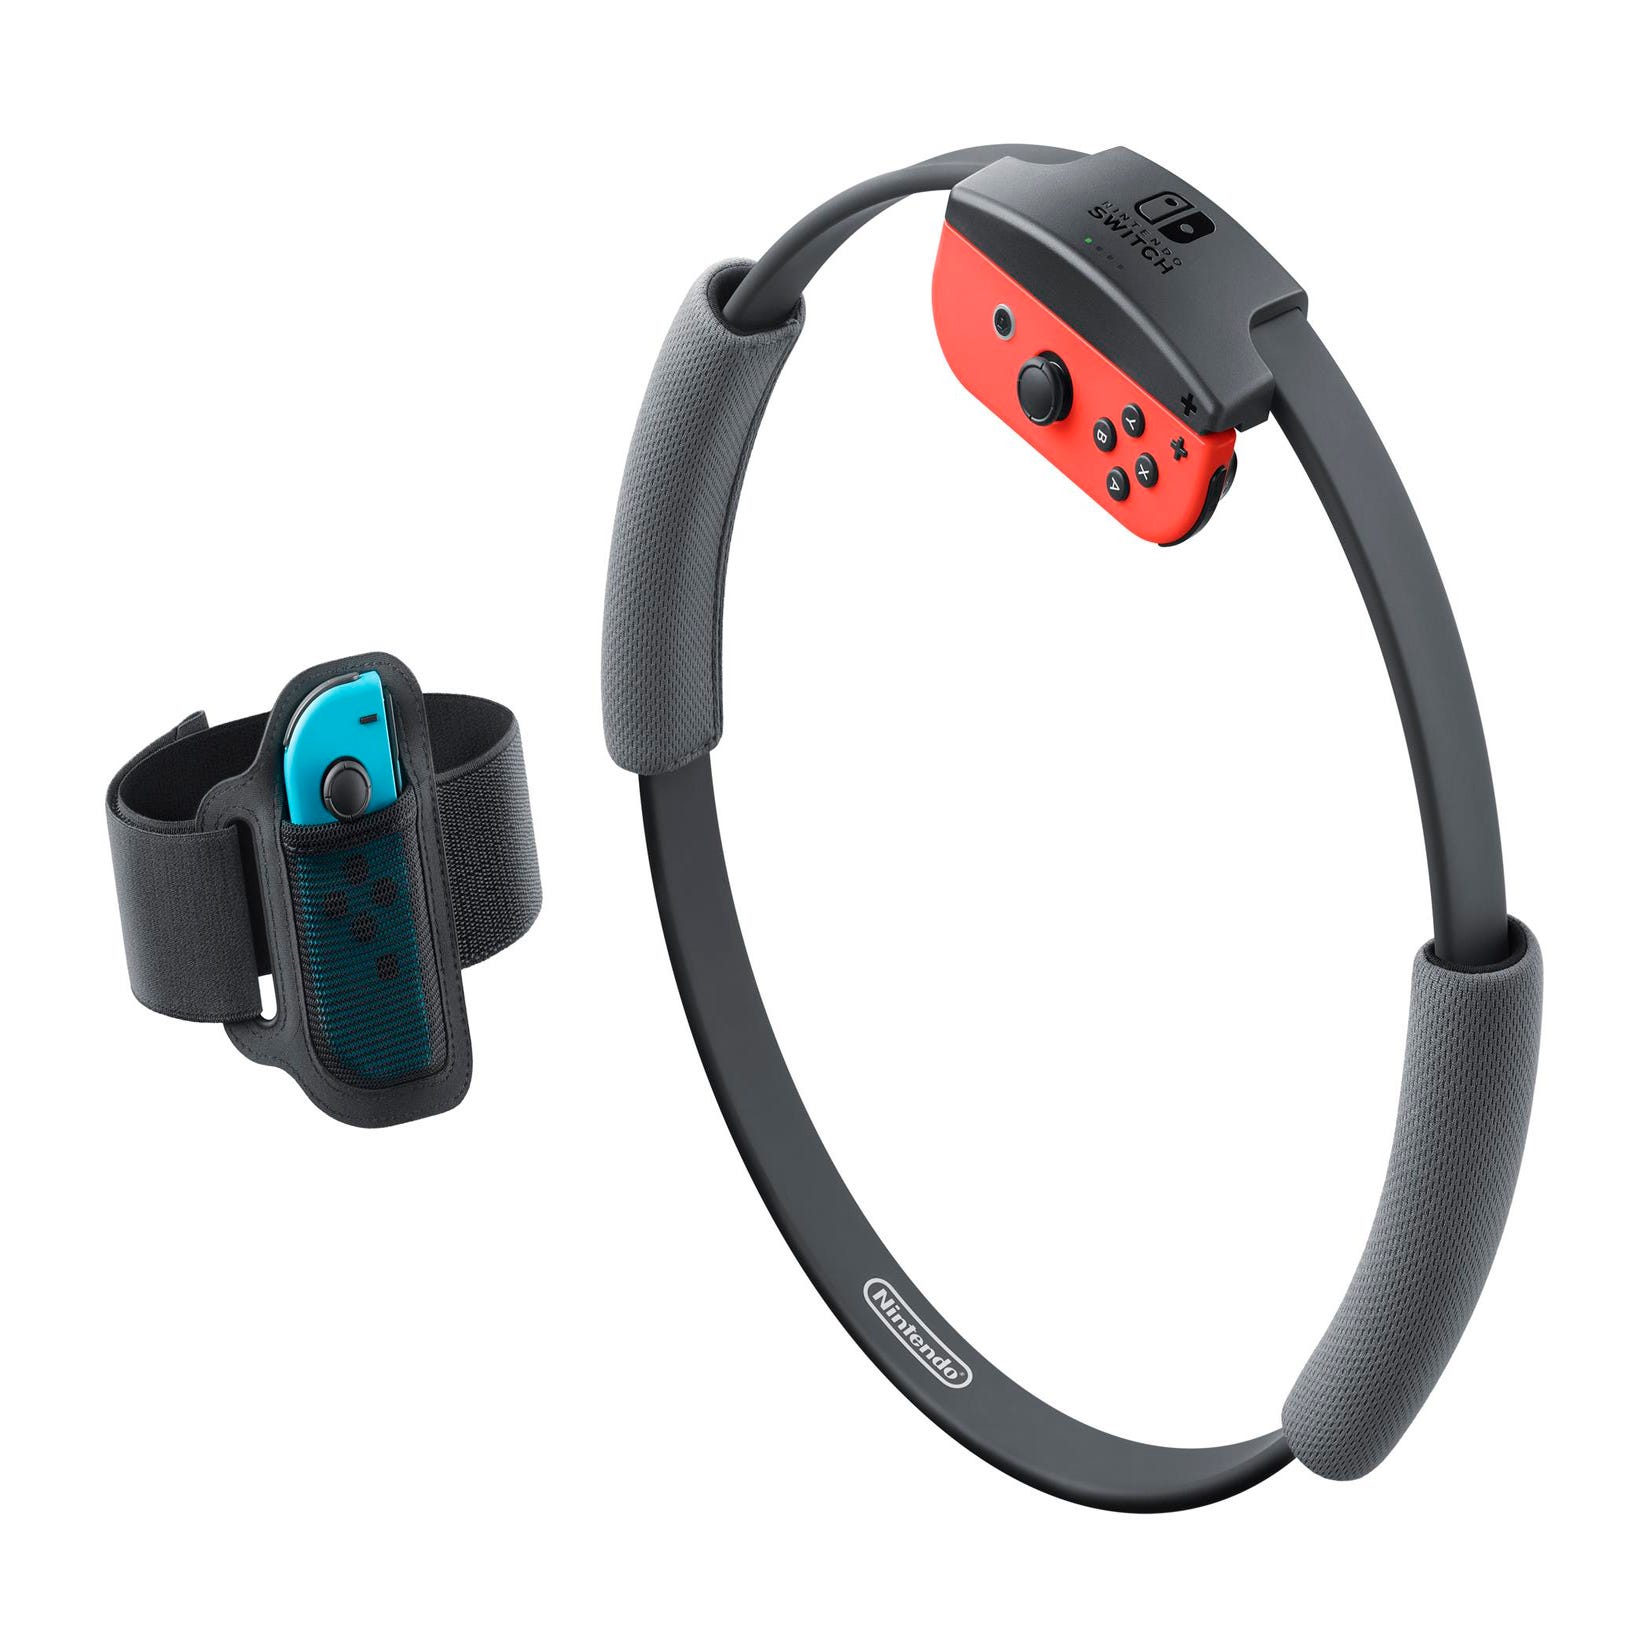 ring fit adventure switch(missing leg strap)